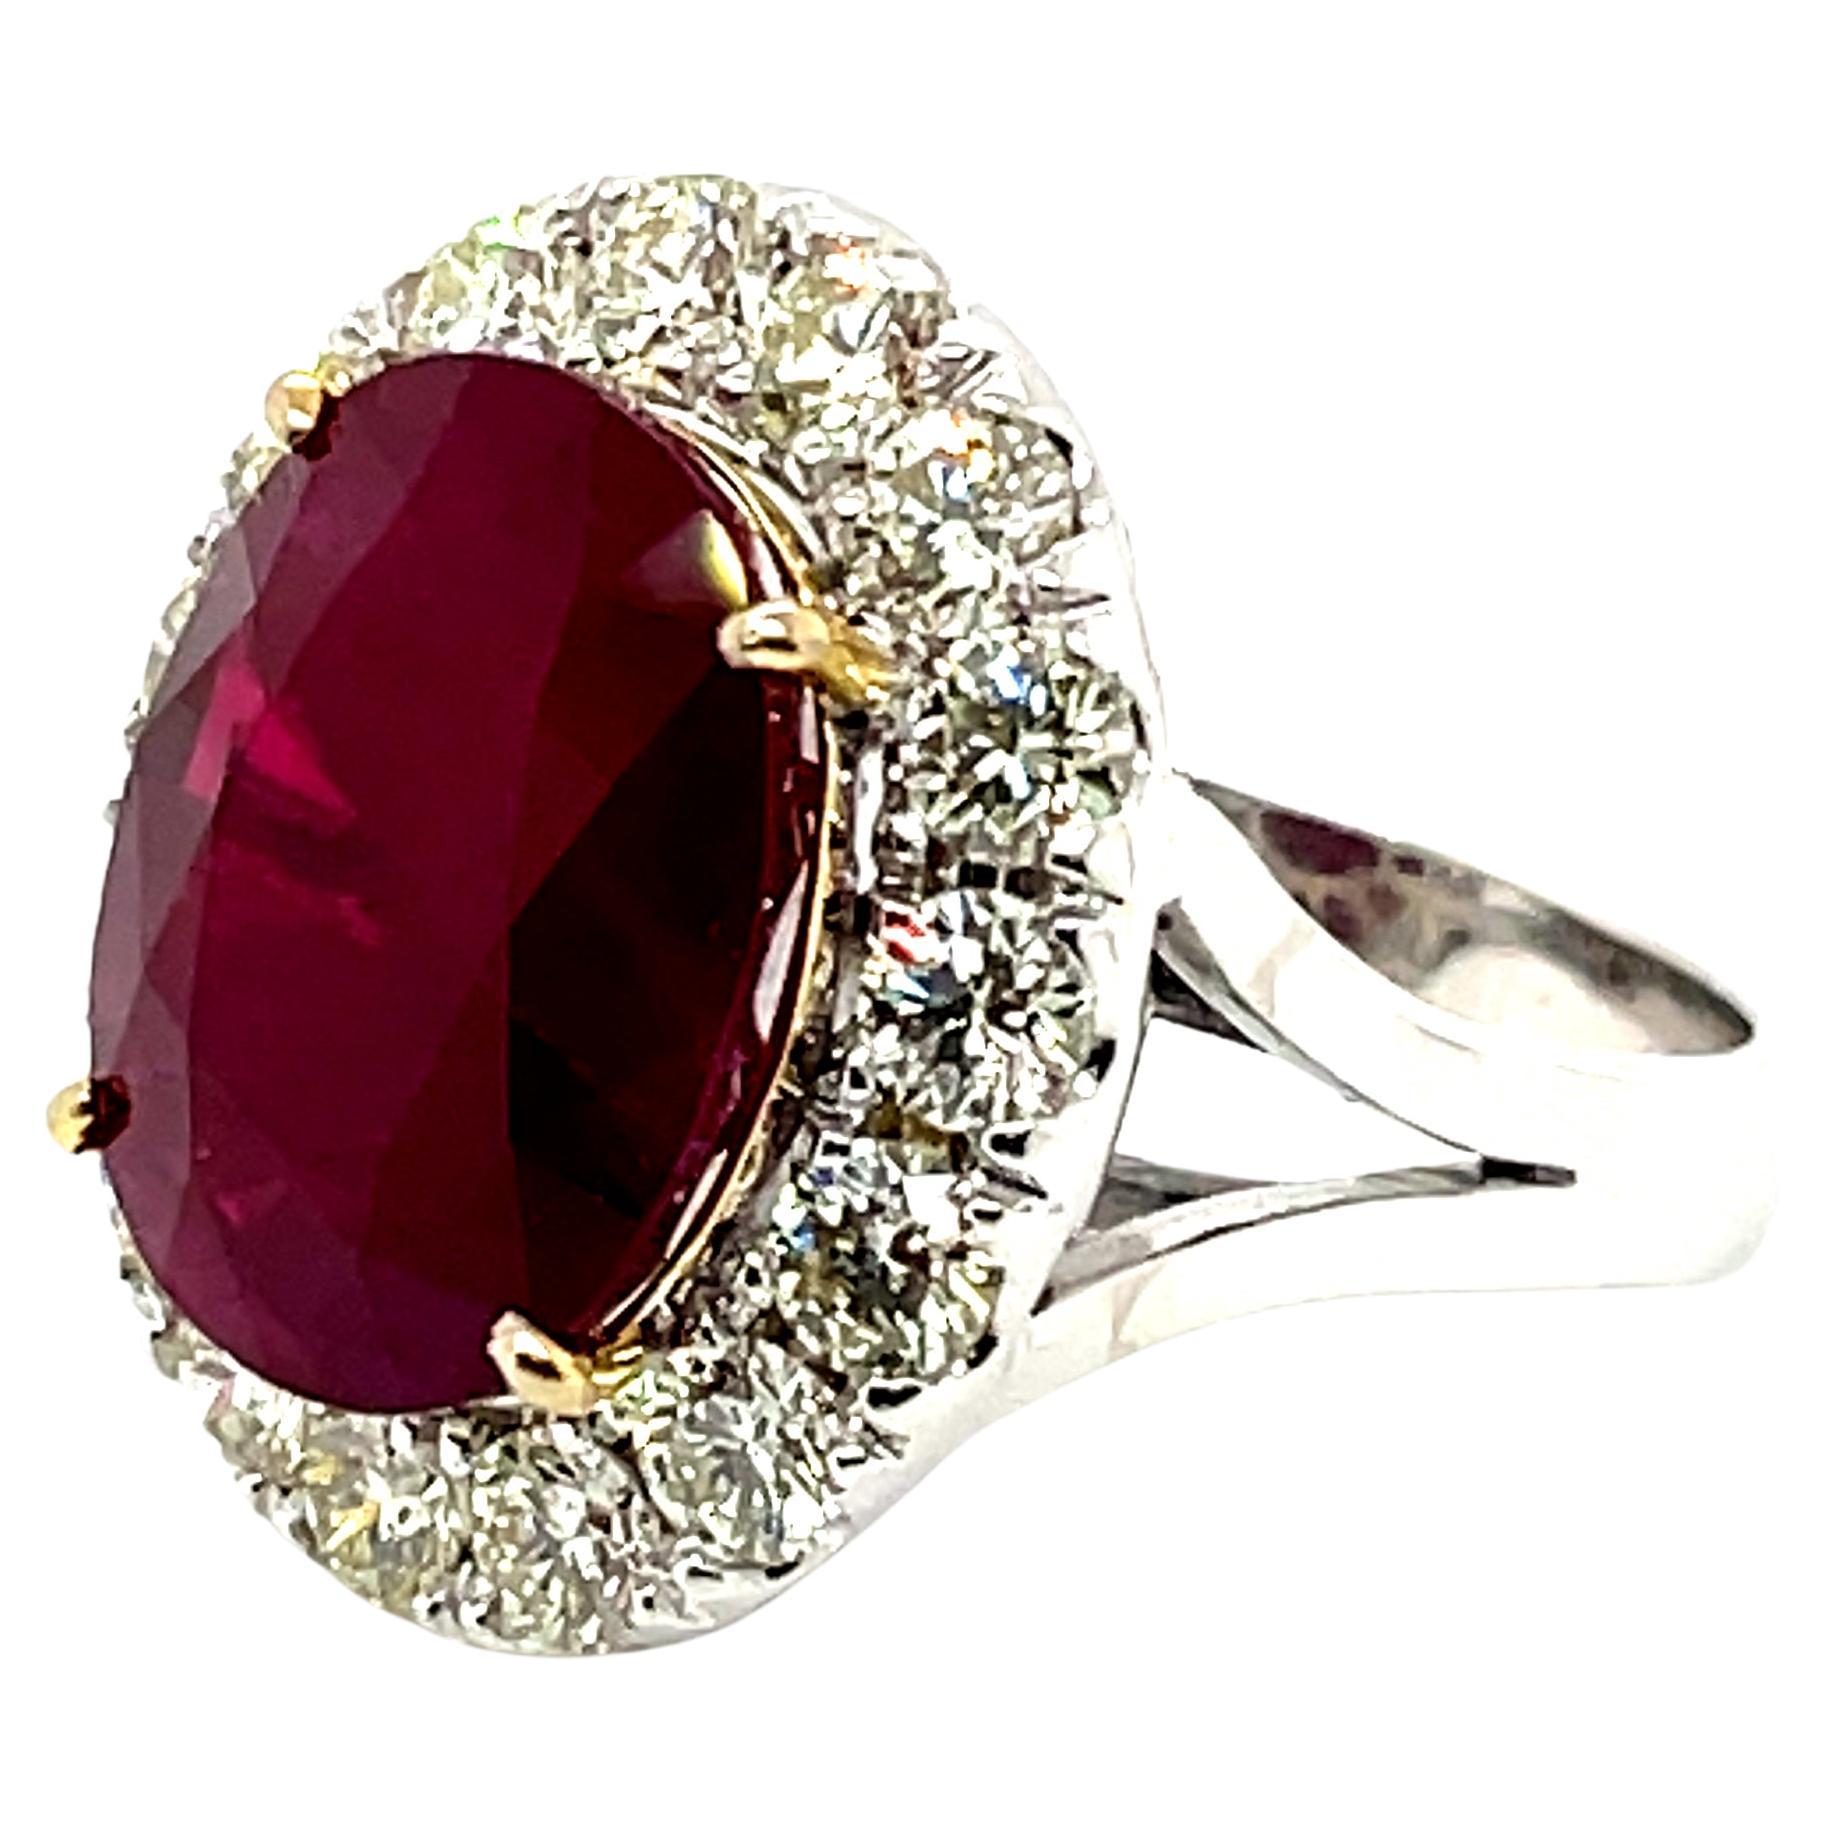 Faceted Oval Ruby Cts 10.58 and Diamond Engagement Ring GRS Certified 